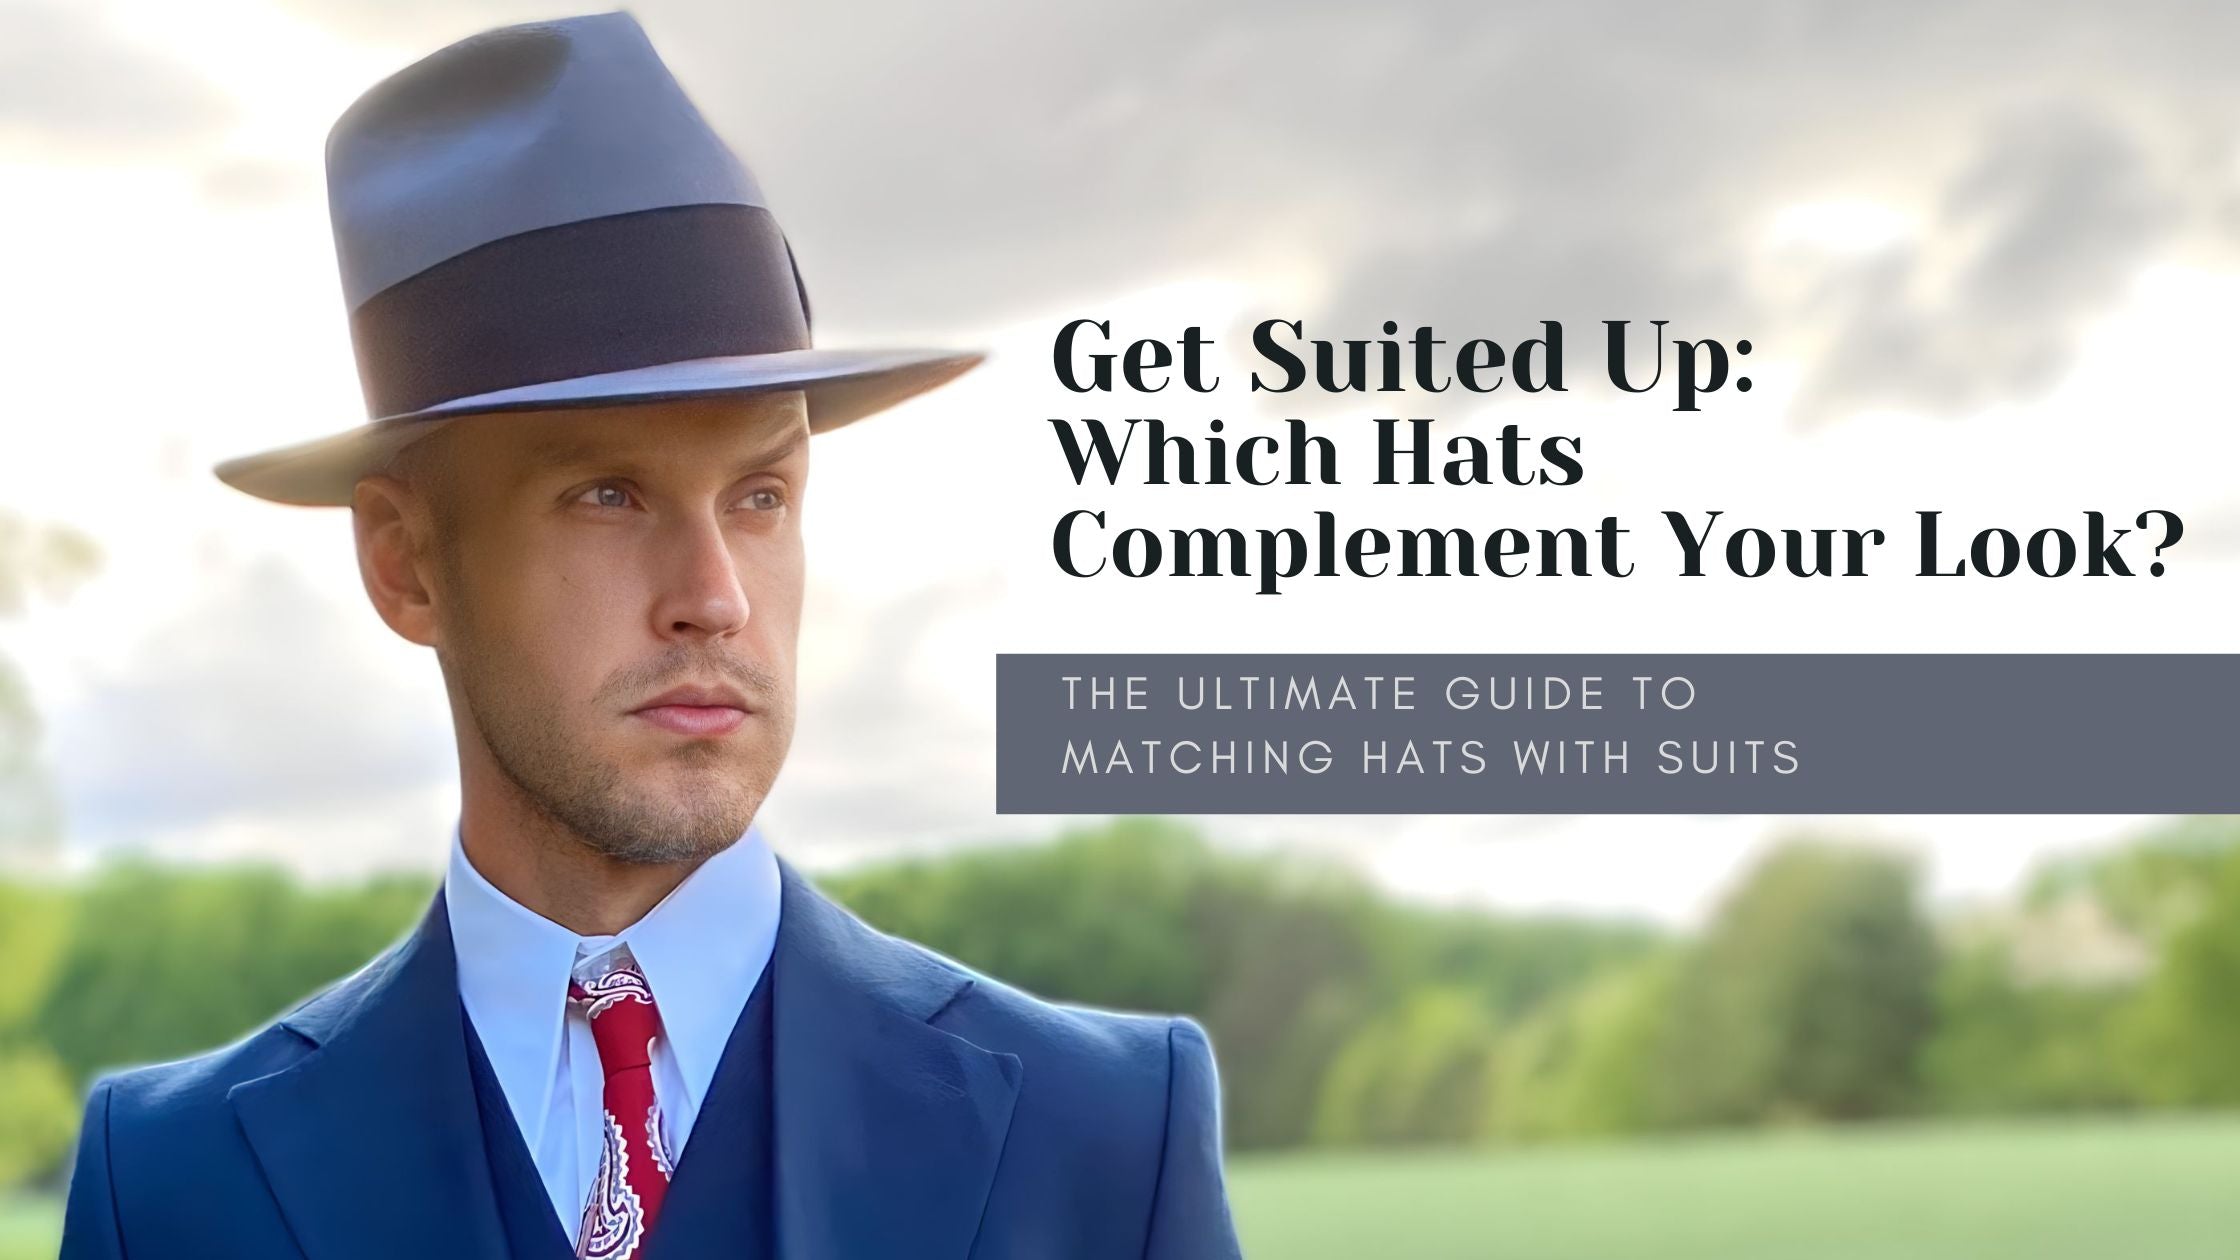 Suit Up in Style: The Best Hat and Suit Pairings